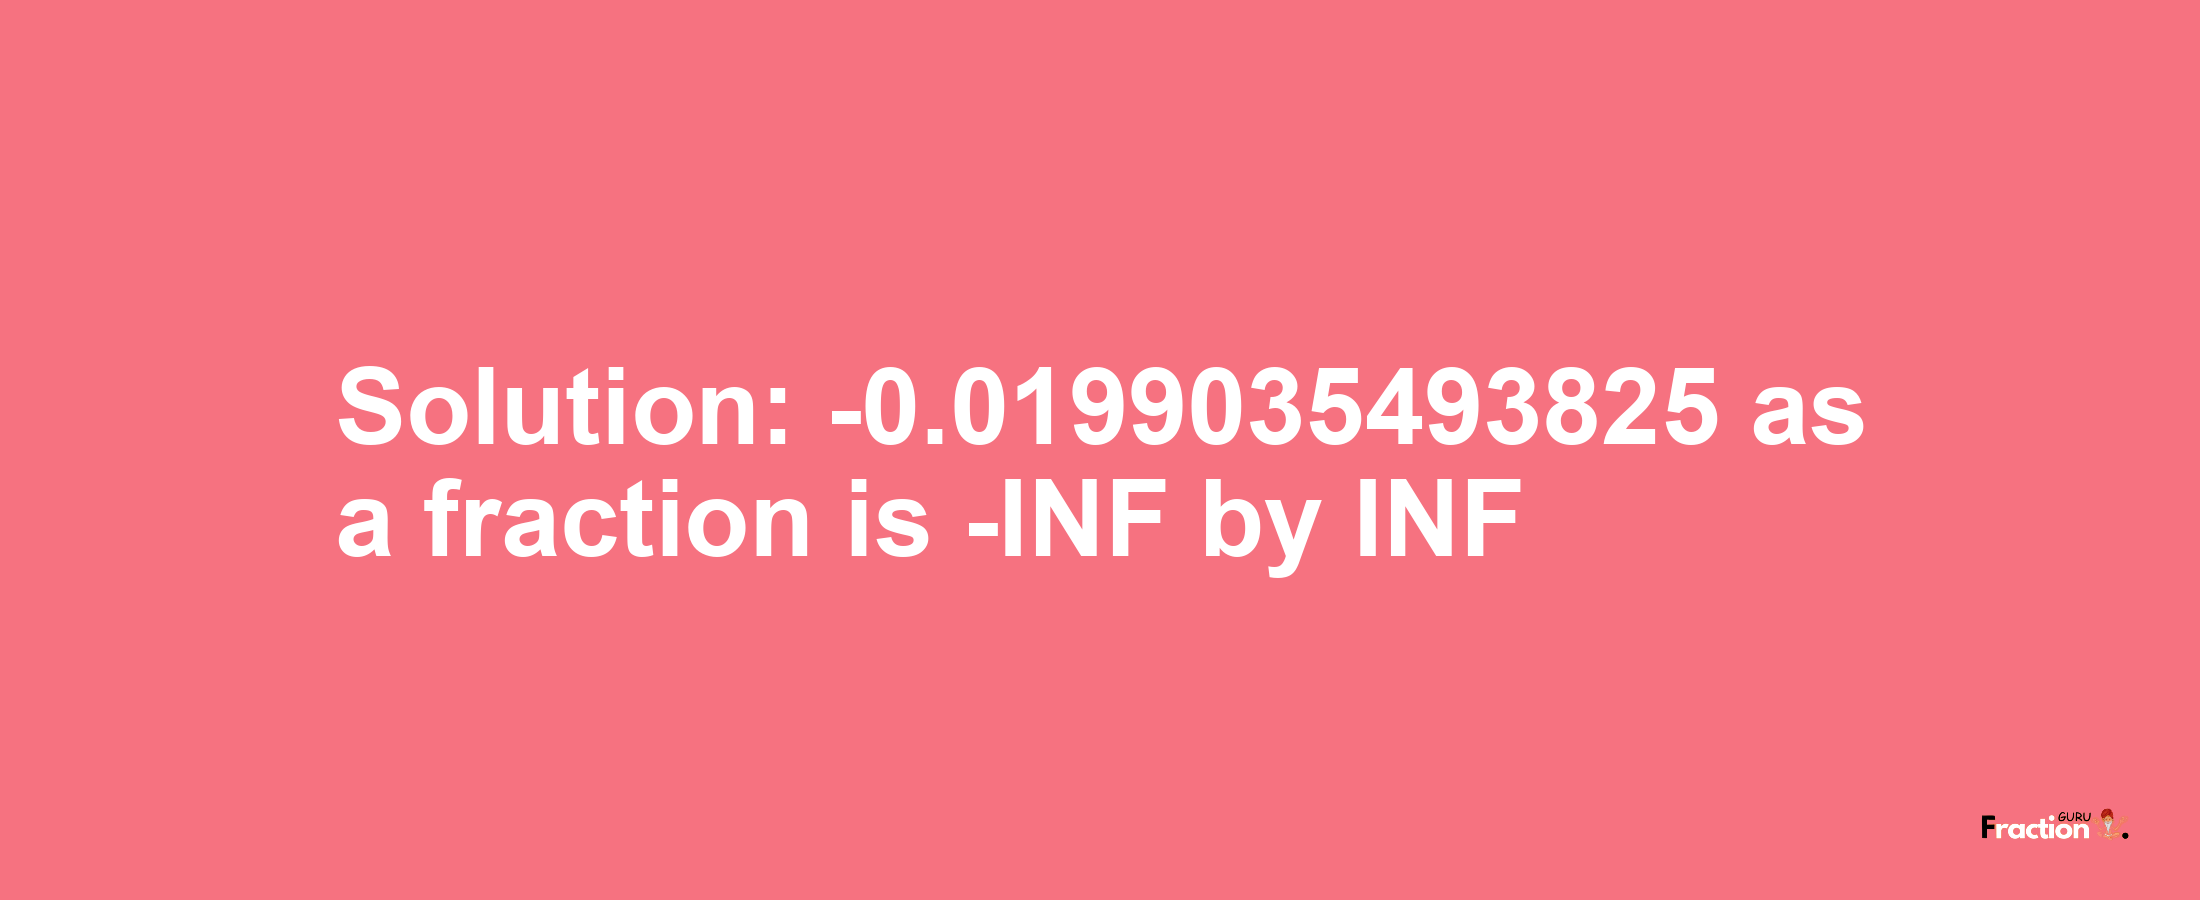 Solution:-0.0199035493825 as a fraction is -INF/INF